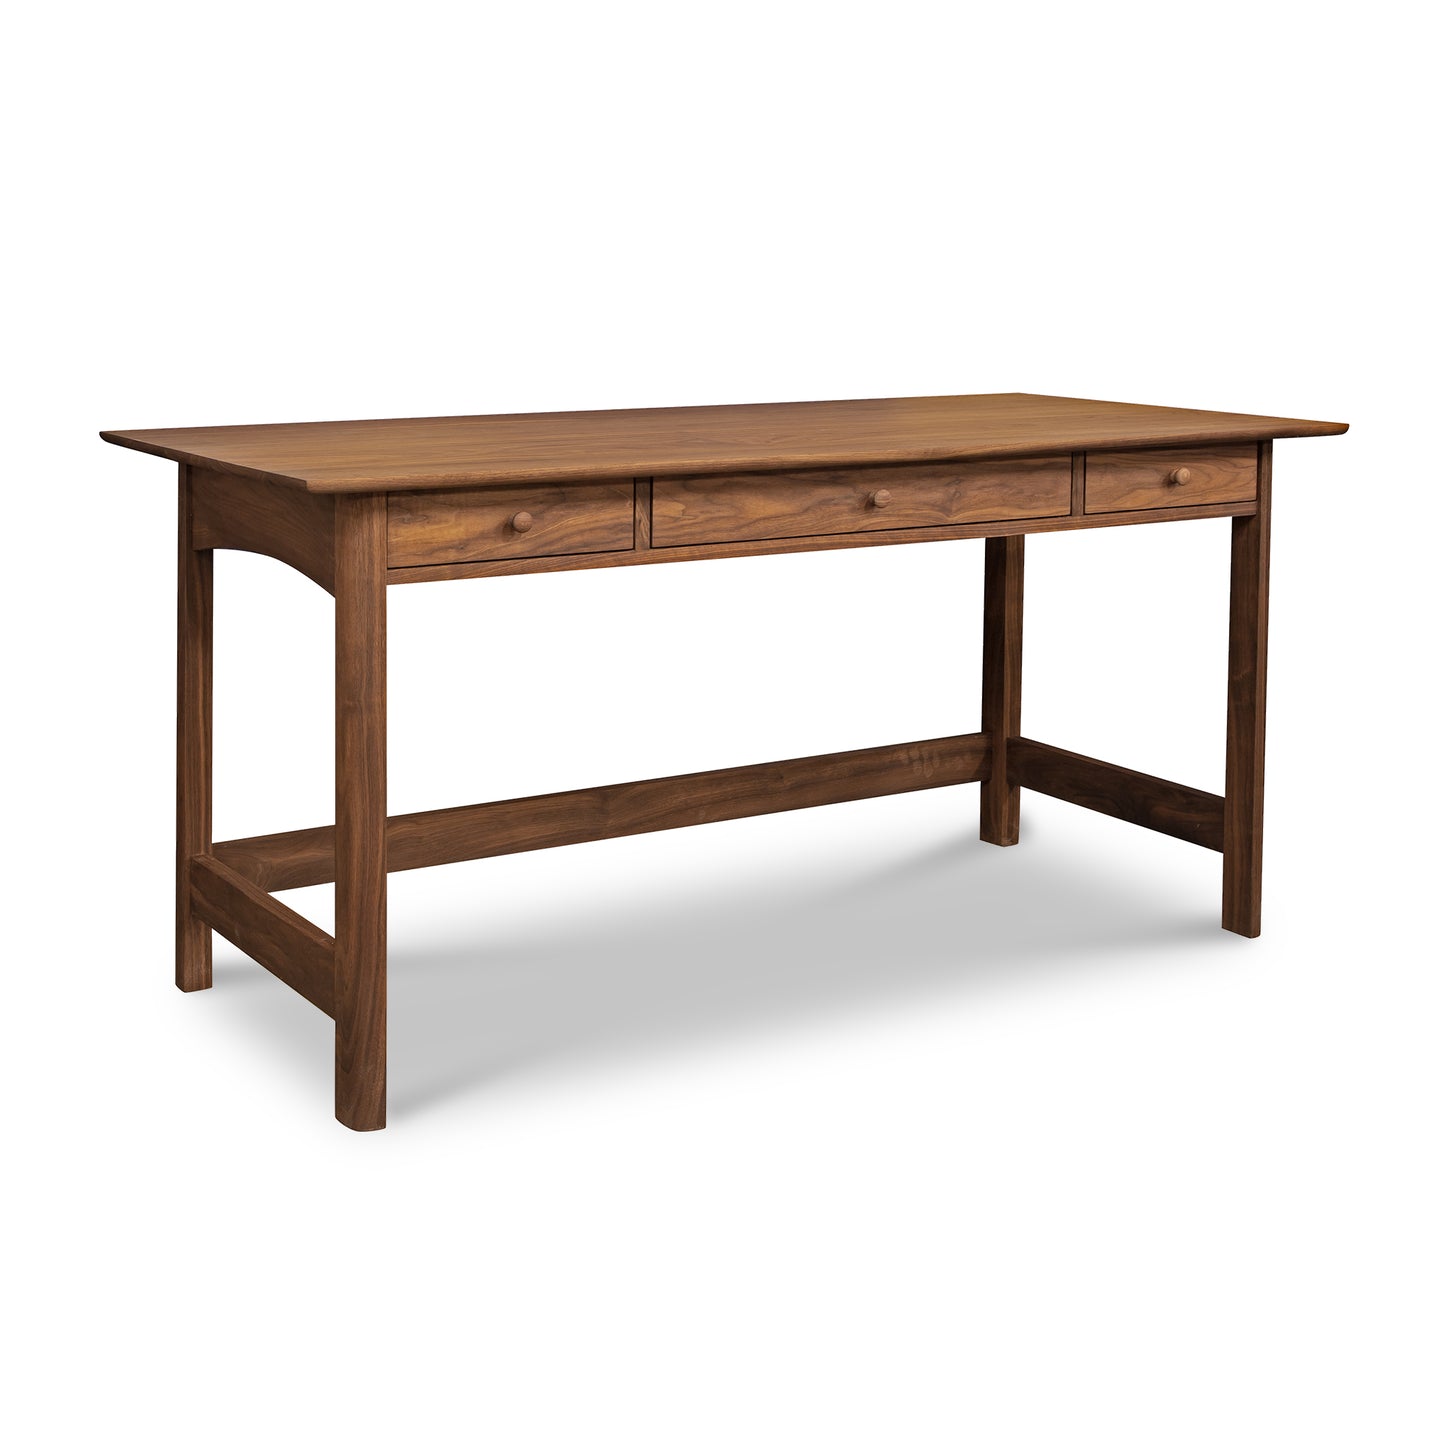 A Heartwood Shaker Library Desk by Vermont Furniture Designs with three drawers, isolated on a white background.